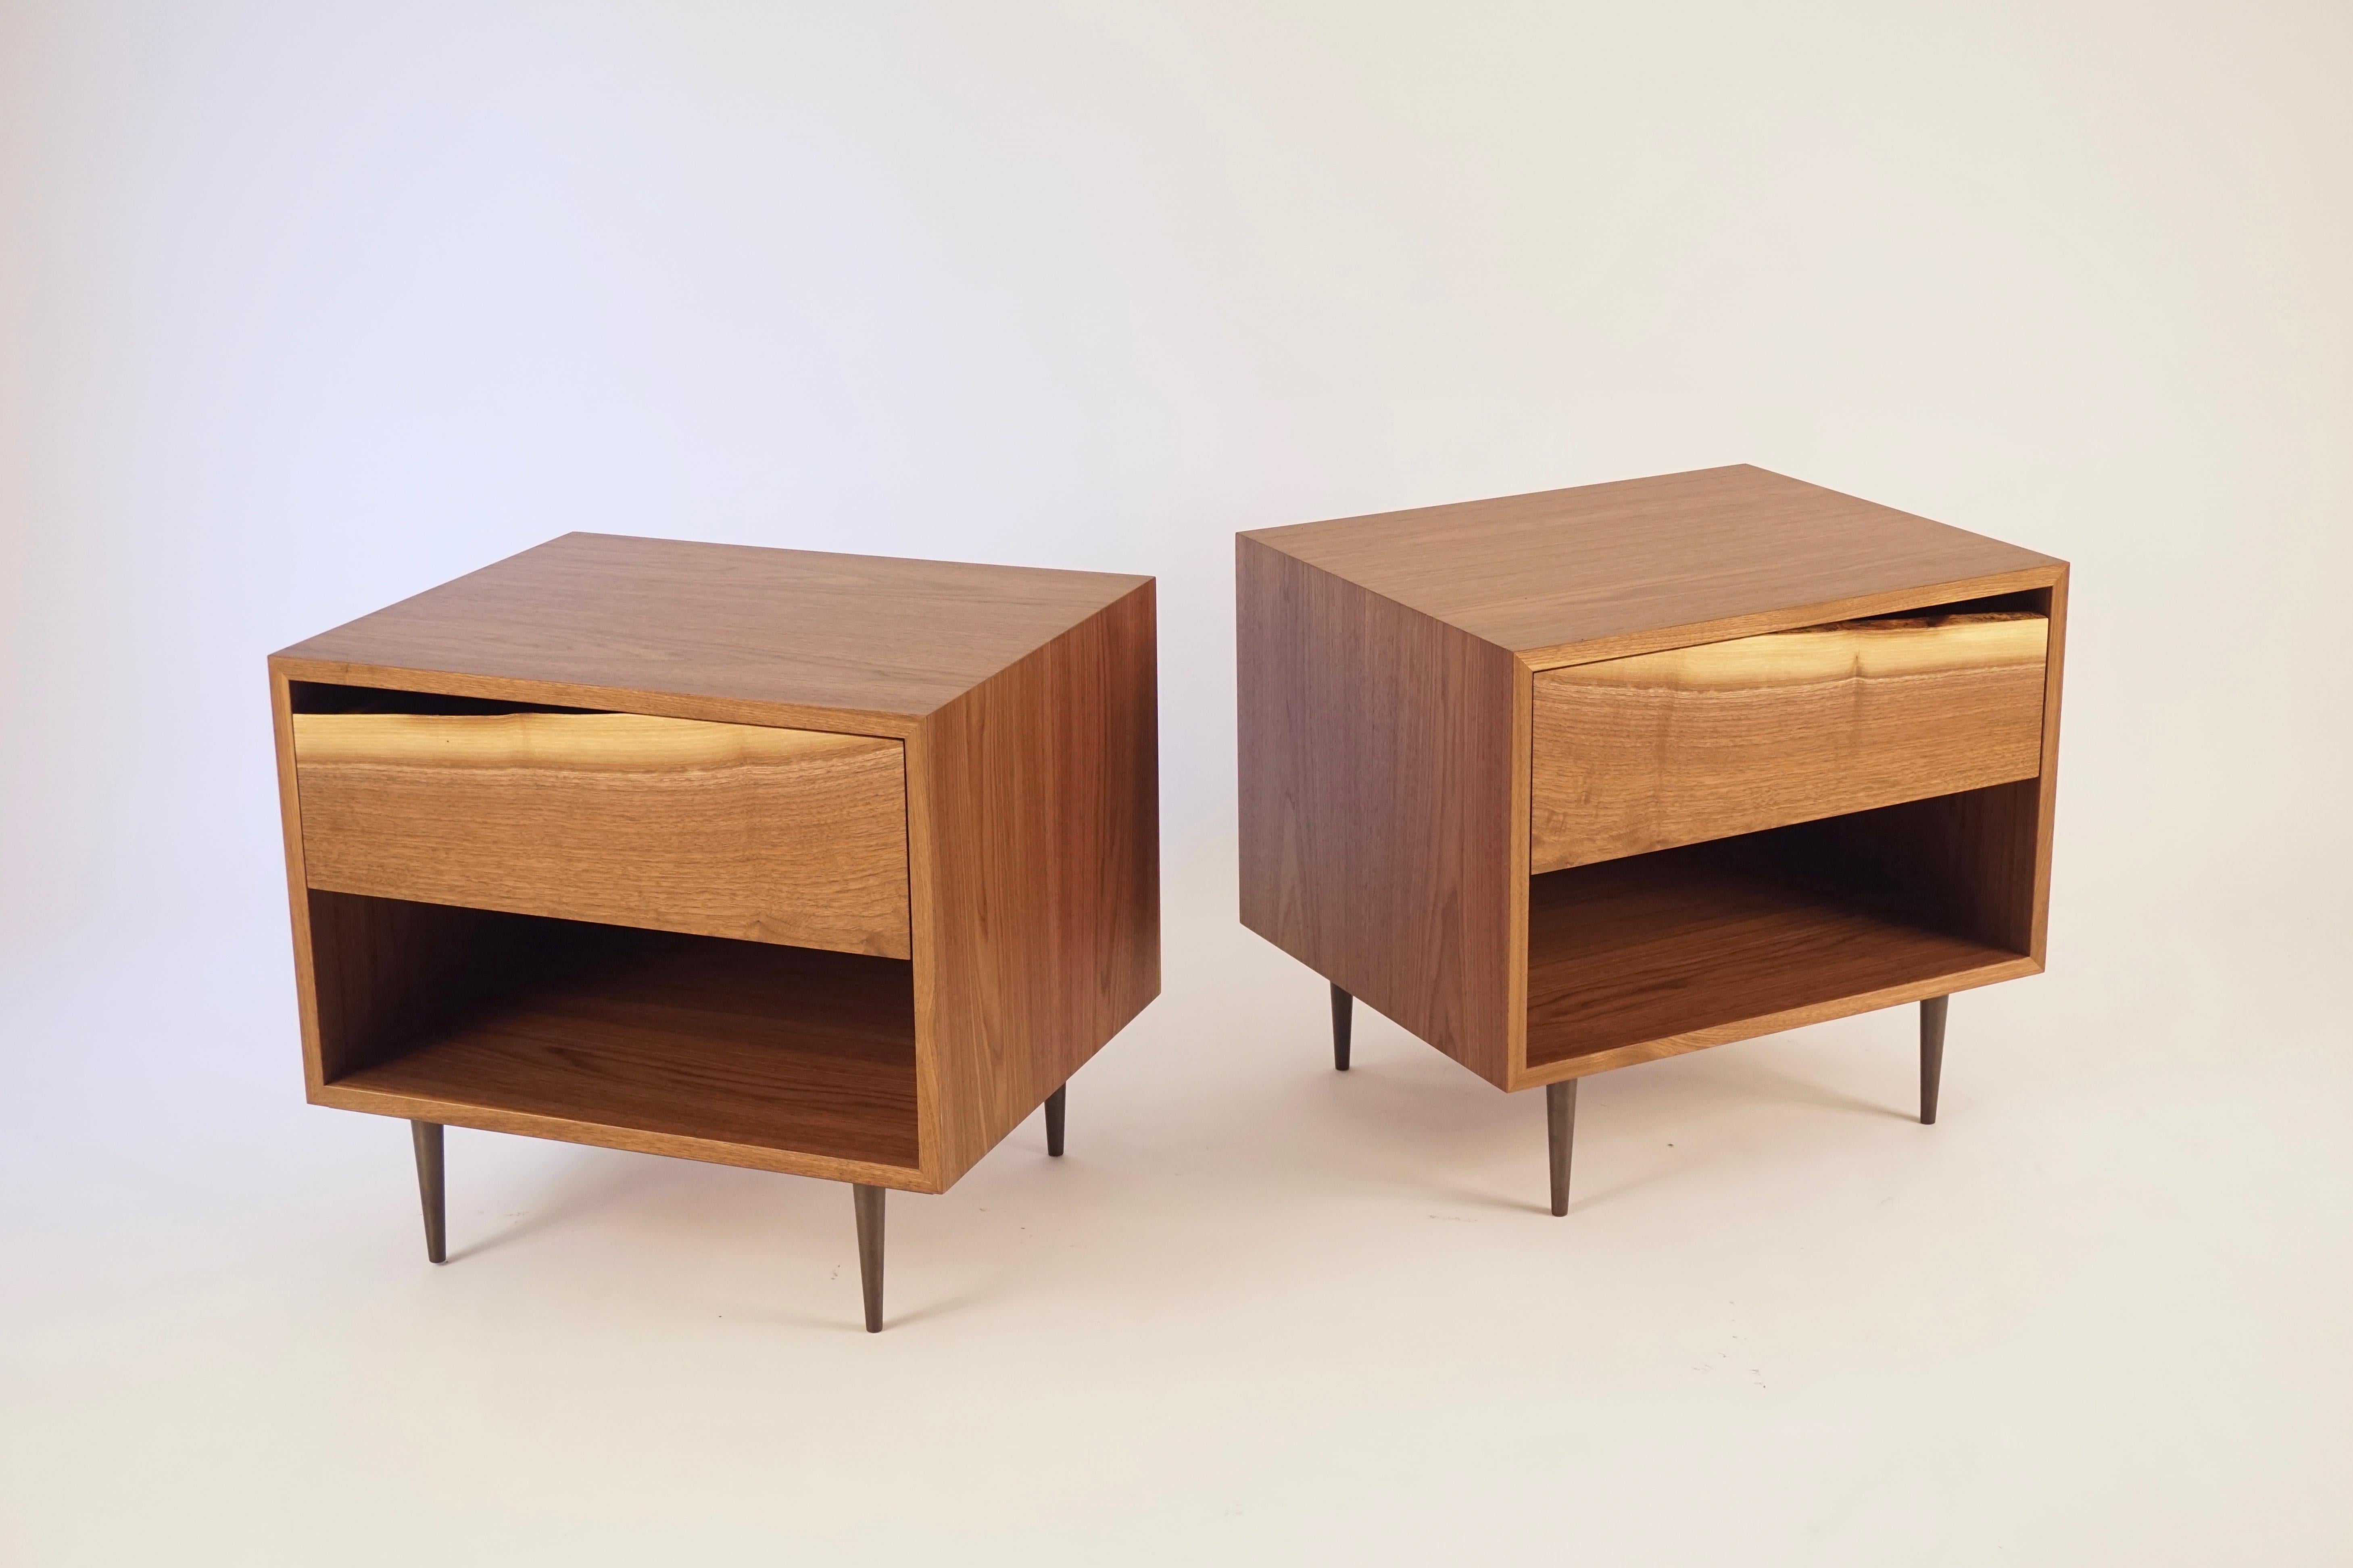 These bedside tables are from a collection of cabinets that emphasize the organic shape of the tree as a functional handle for the drawer faces. Each piece, or group of pieces, use boards from the same tree, as they appear after milling. The bases